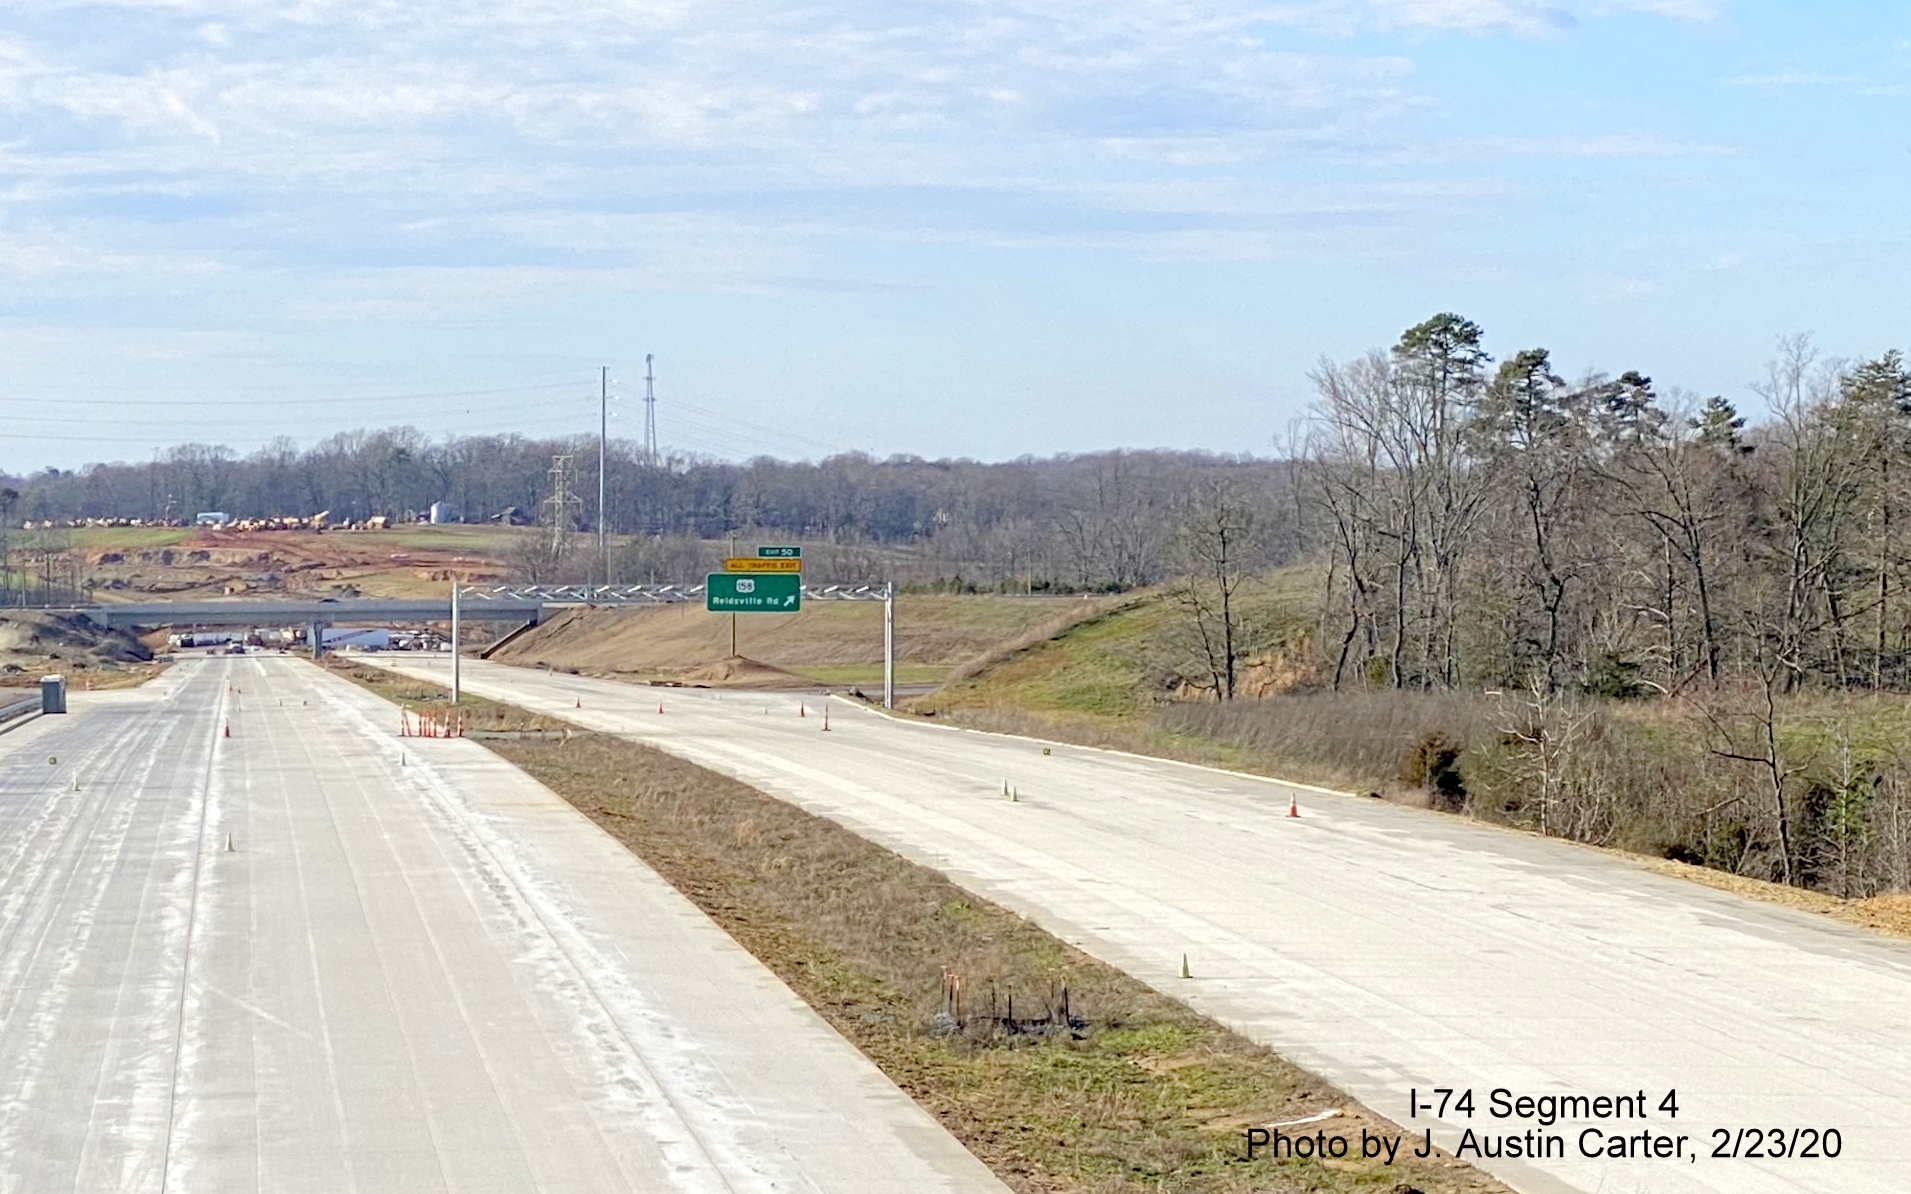 Image newly placed overhead exit ramp sign for US 158 on Future I-74 West/
        Winston-Salem Beltway, by J. Austin Carter in Feb. 2020